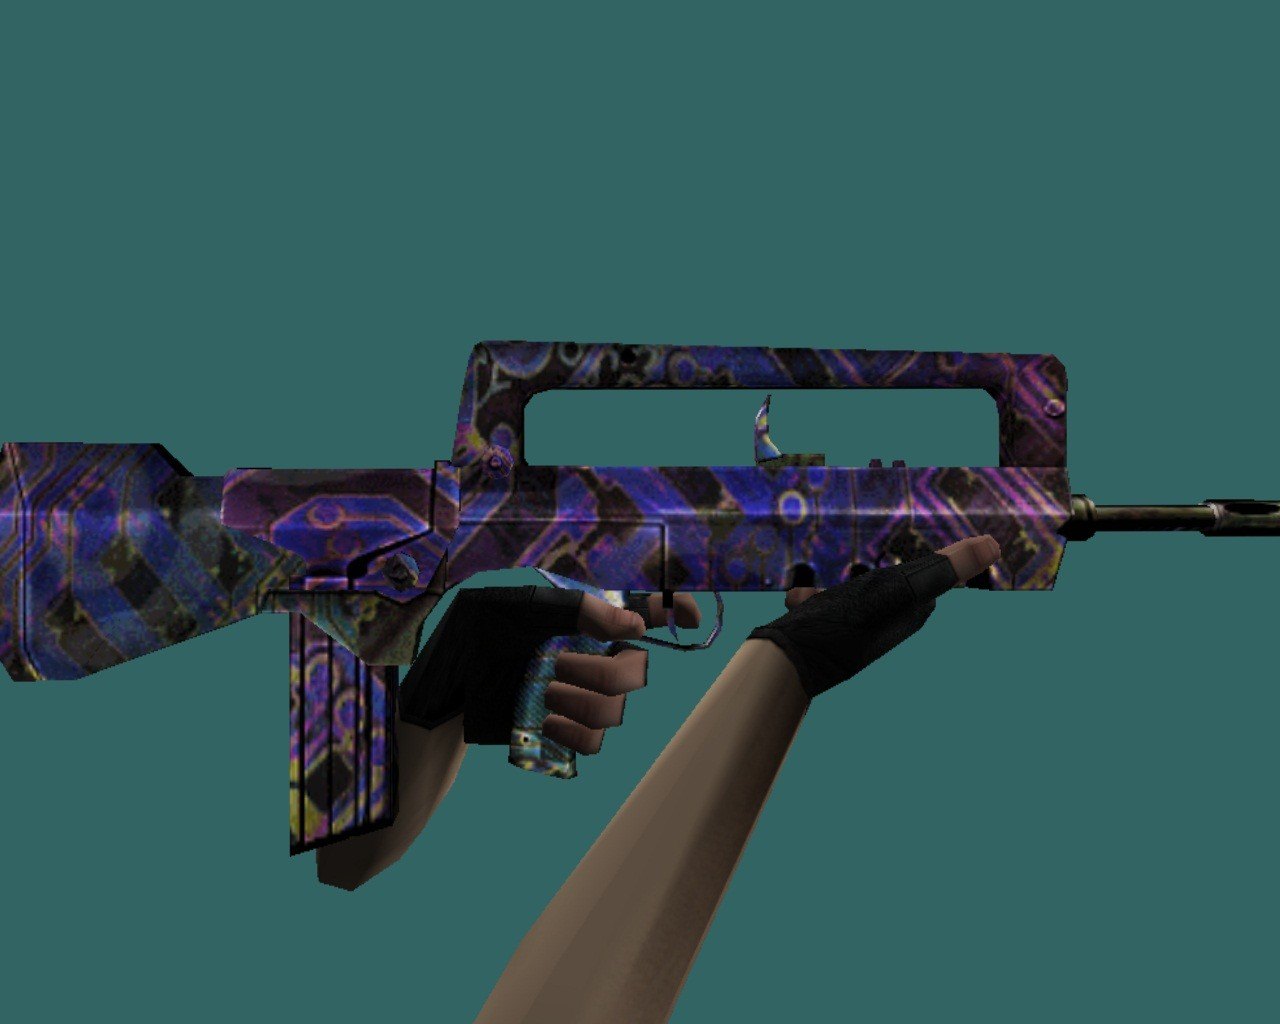 FAMAS Colony cs go skin for apple download free